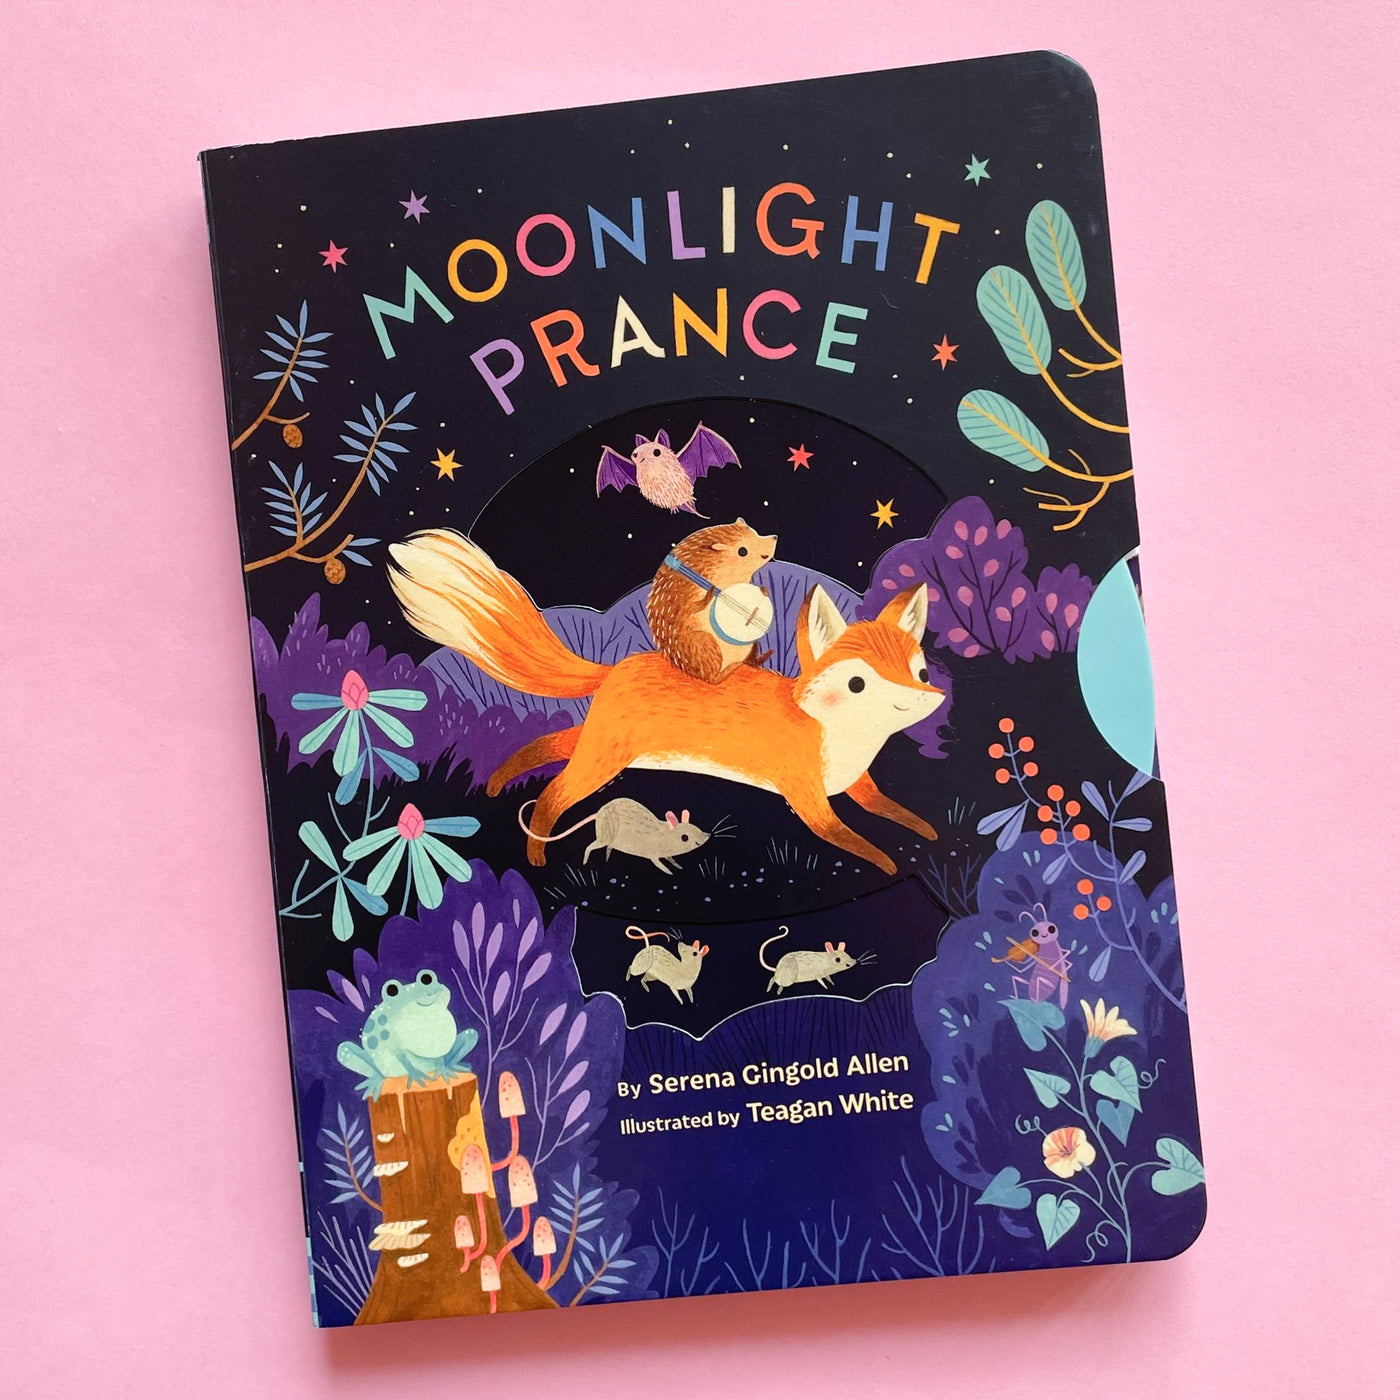 Moonlight Prance by Serena Gingold Allen and Teagan White